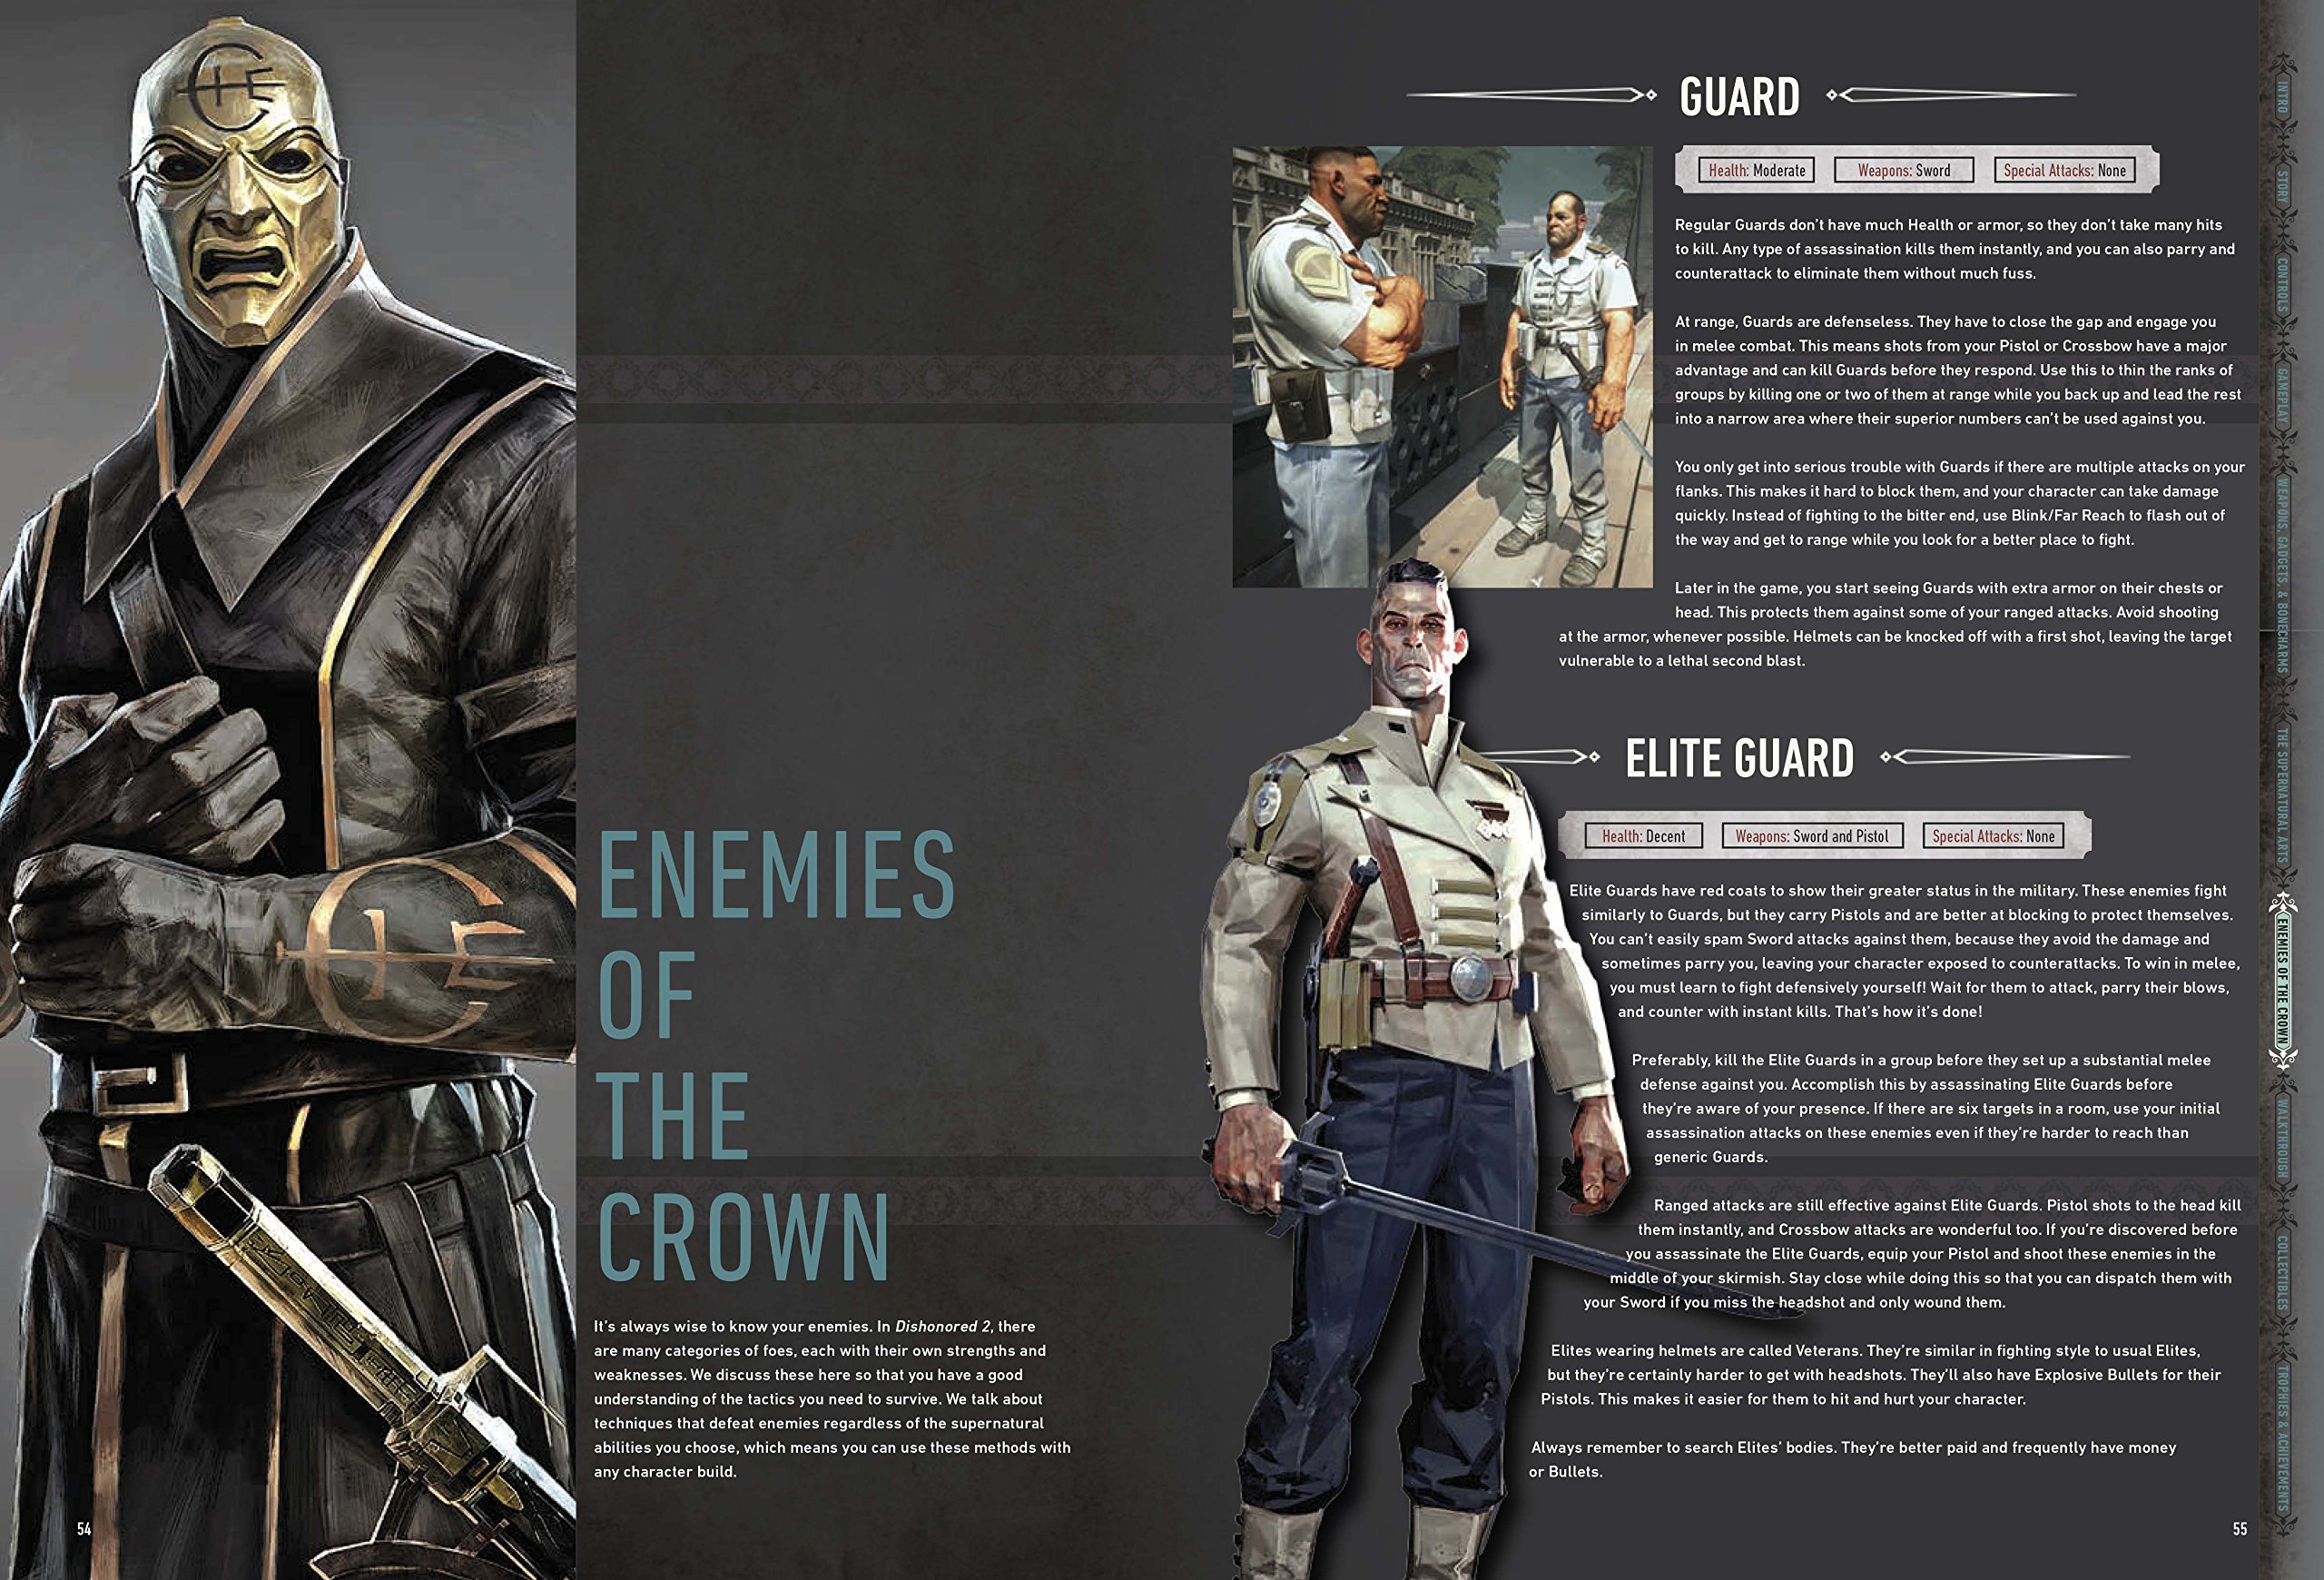 Dishonored 2: Prima Official Guide by Lummis, Michael